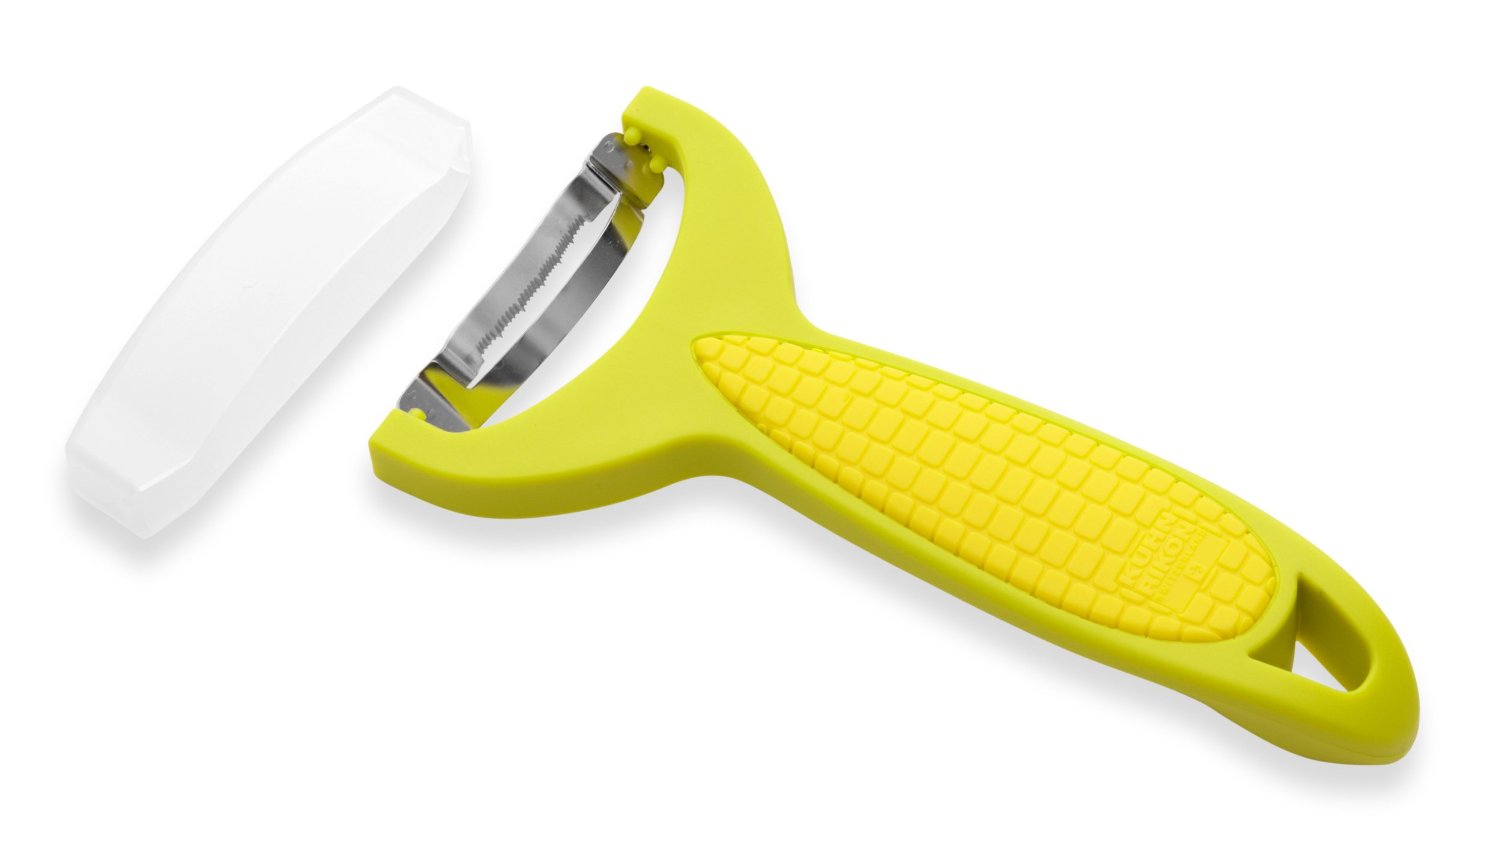 Make Life Easier with This Corn on the Cob Stripper